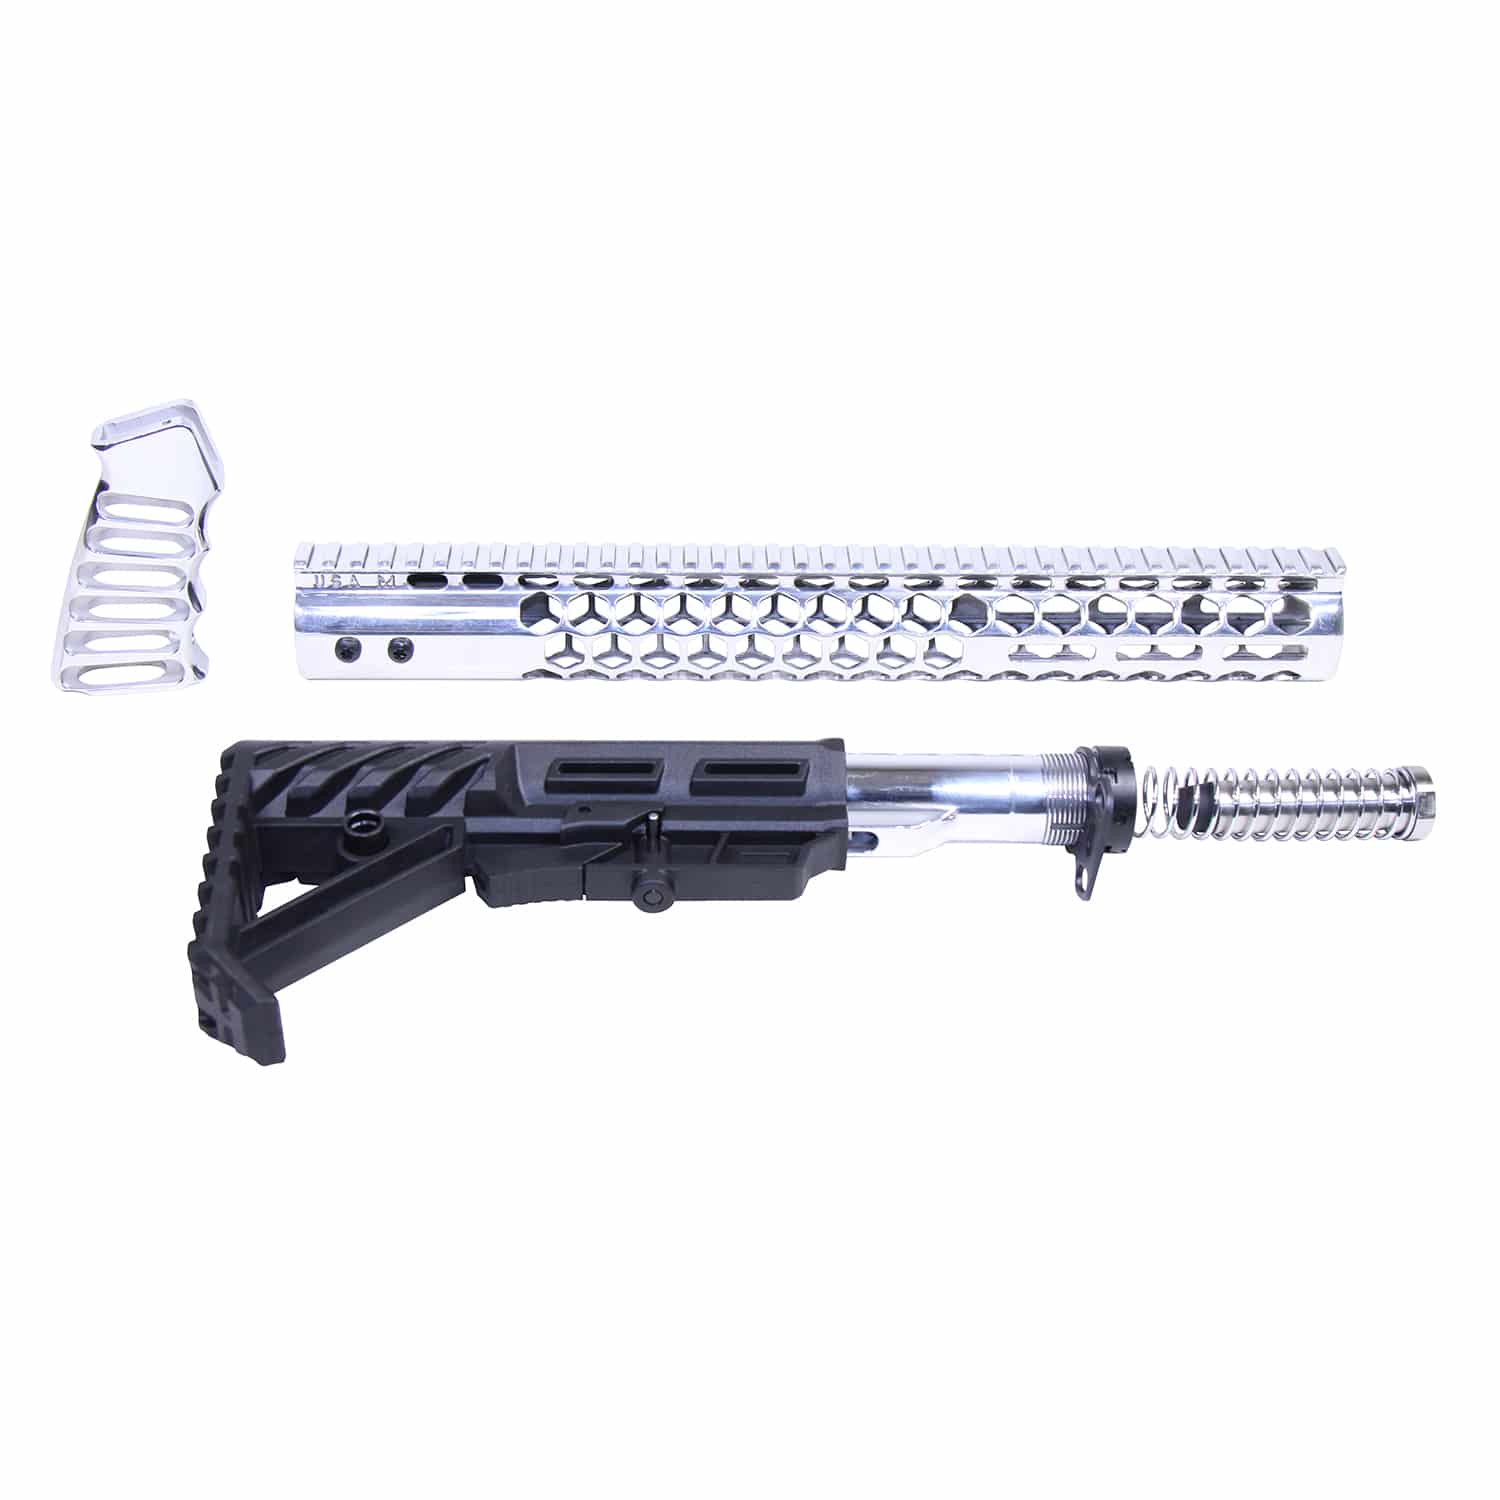 AR-15 Honeycomb Series Complete Rifle Furniture Set in High Polished Aluminum